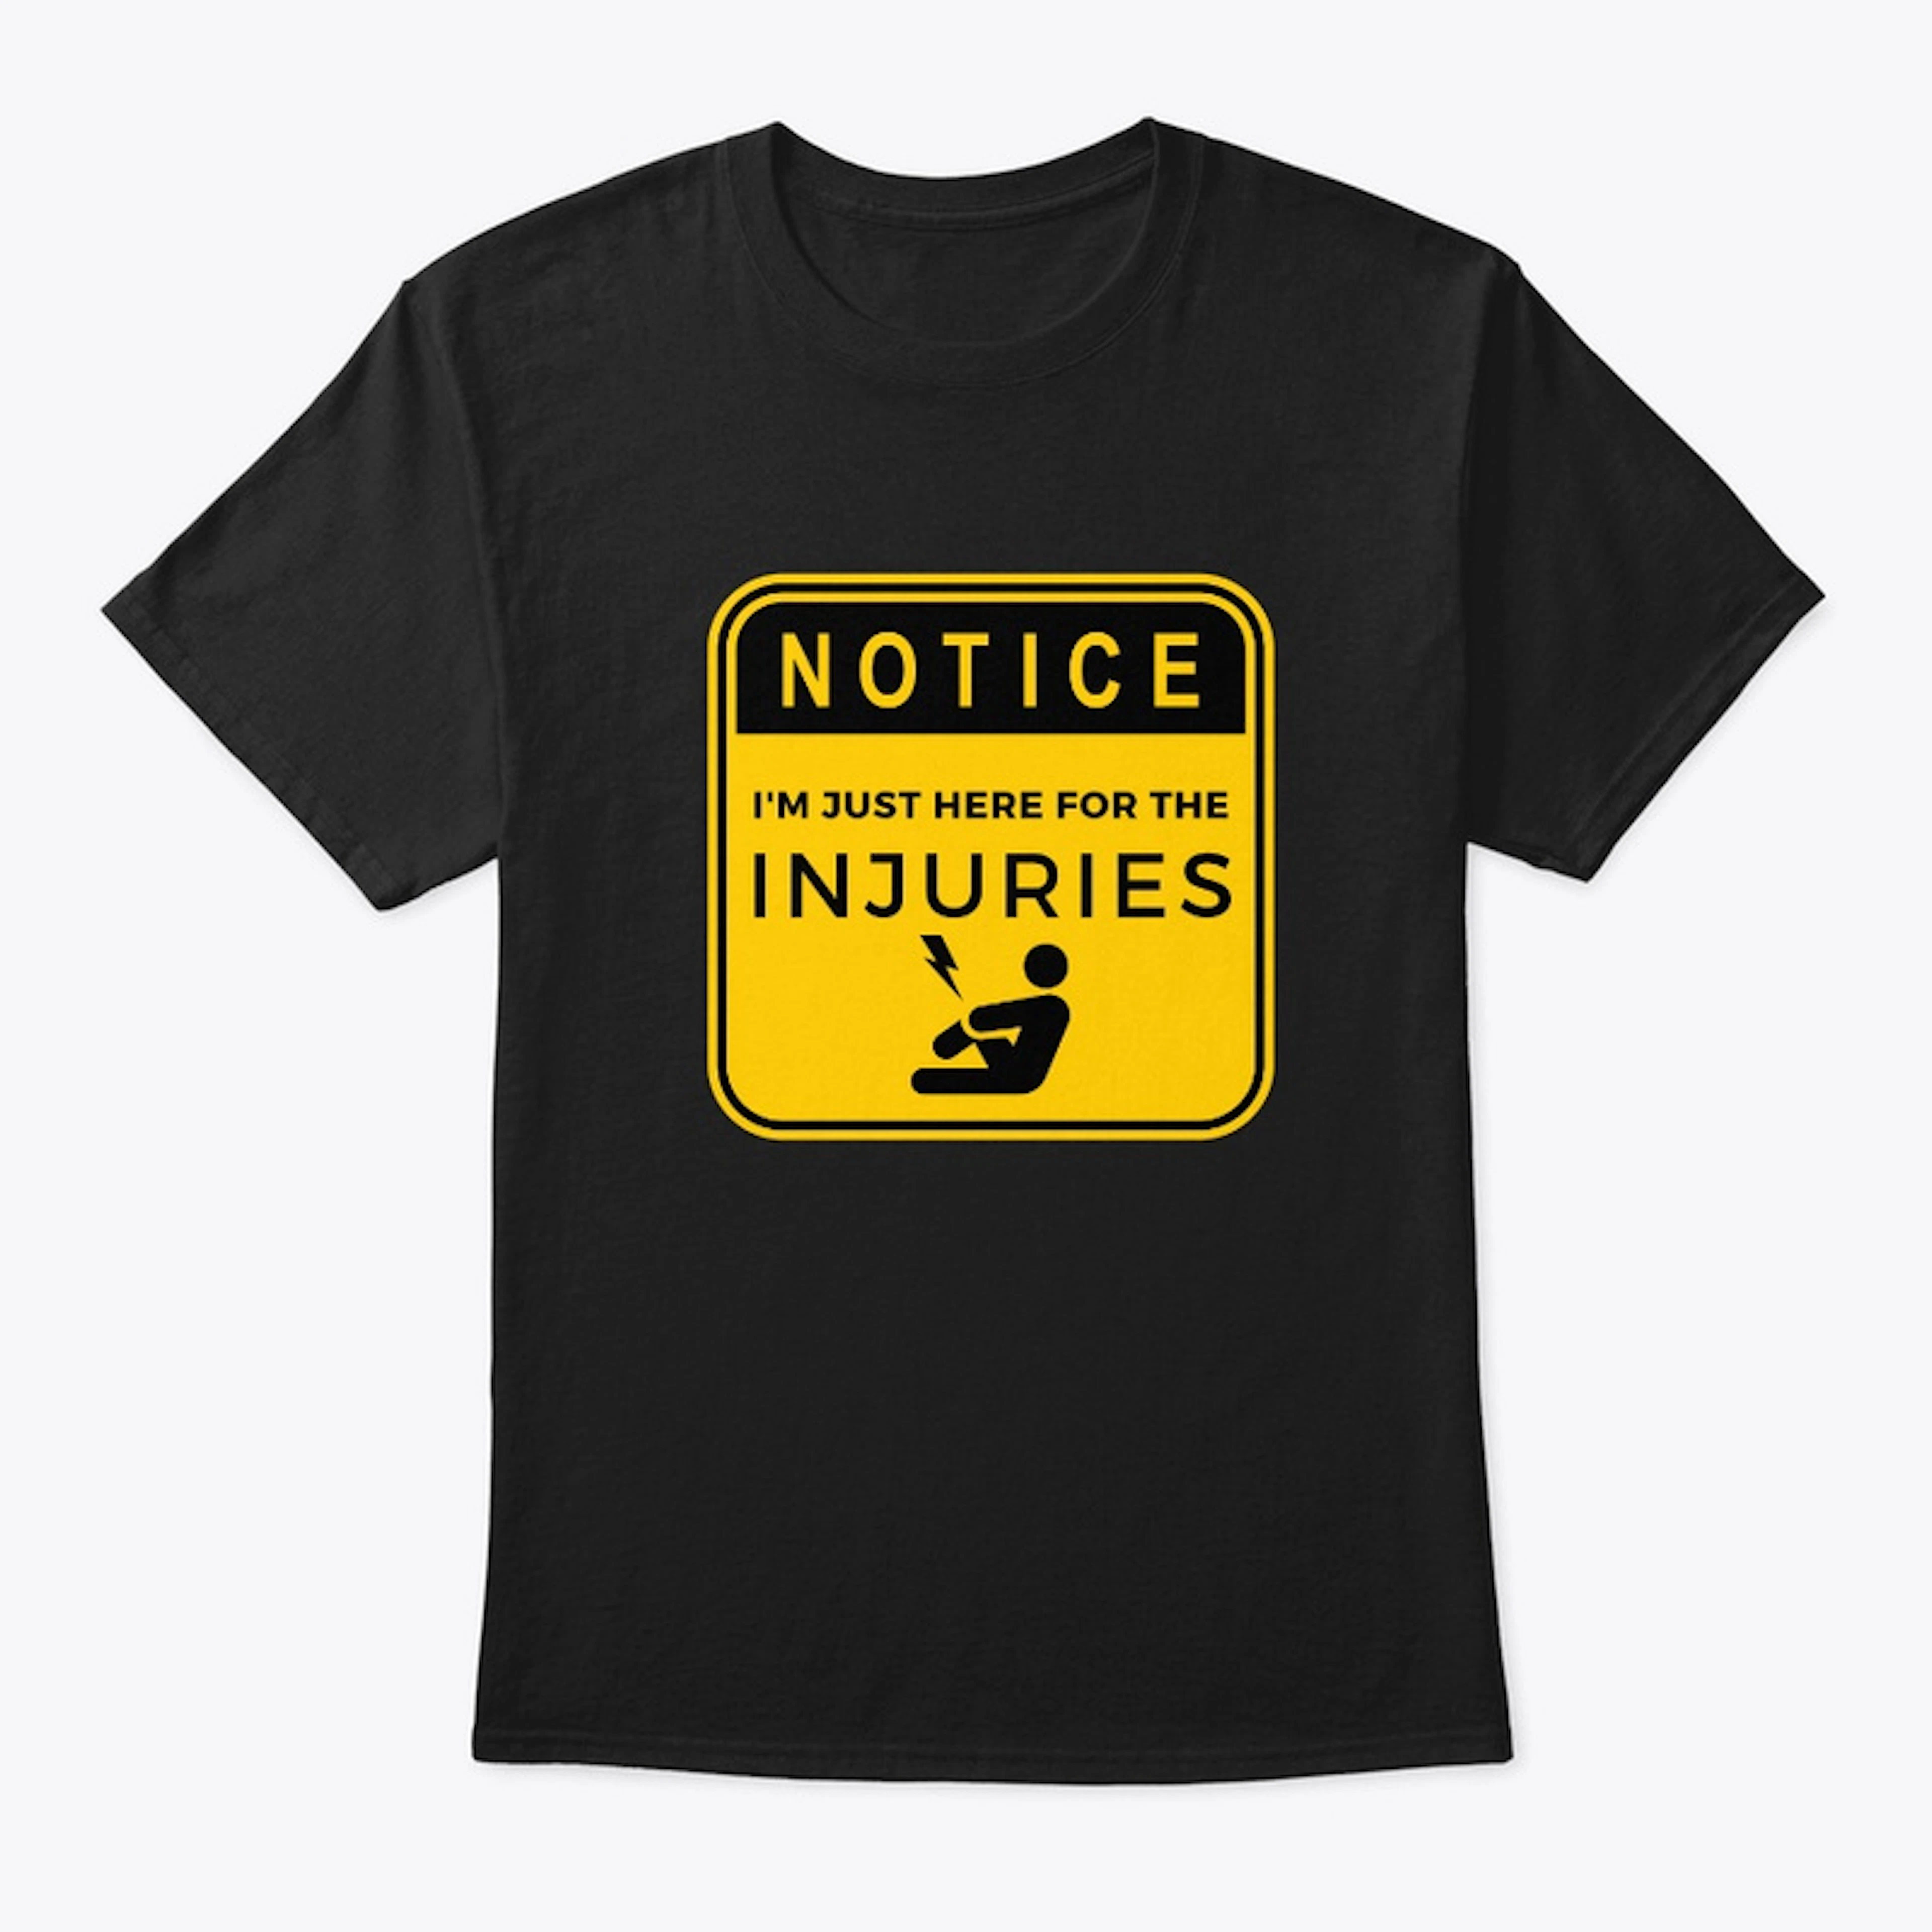 I'm Just Here for the Injuries Tee